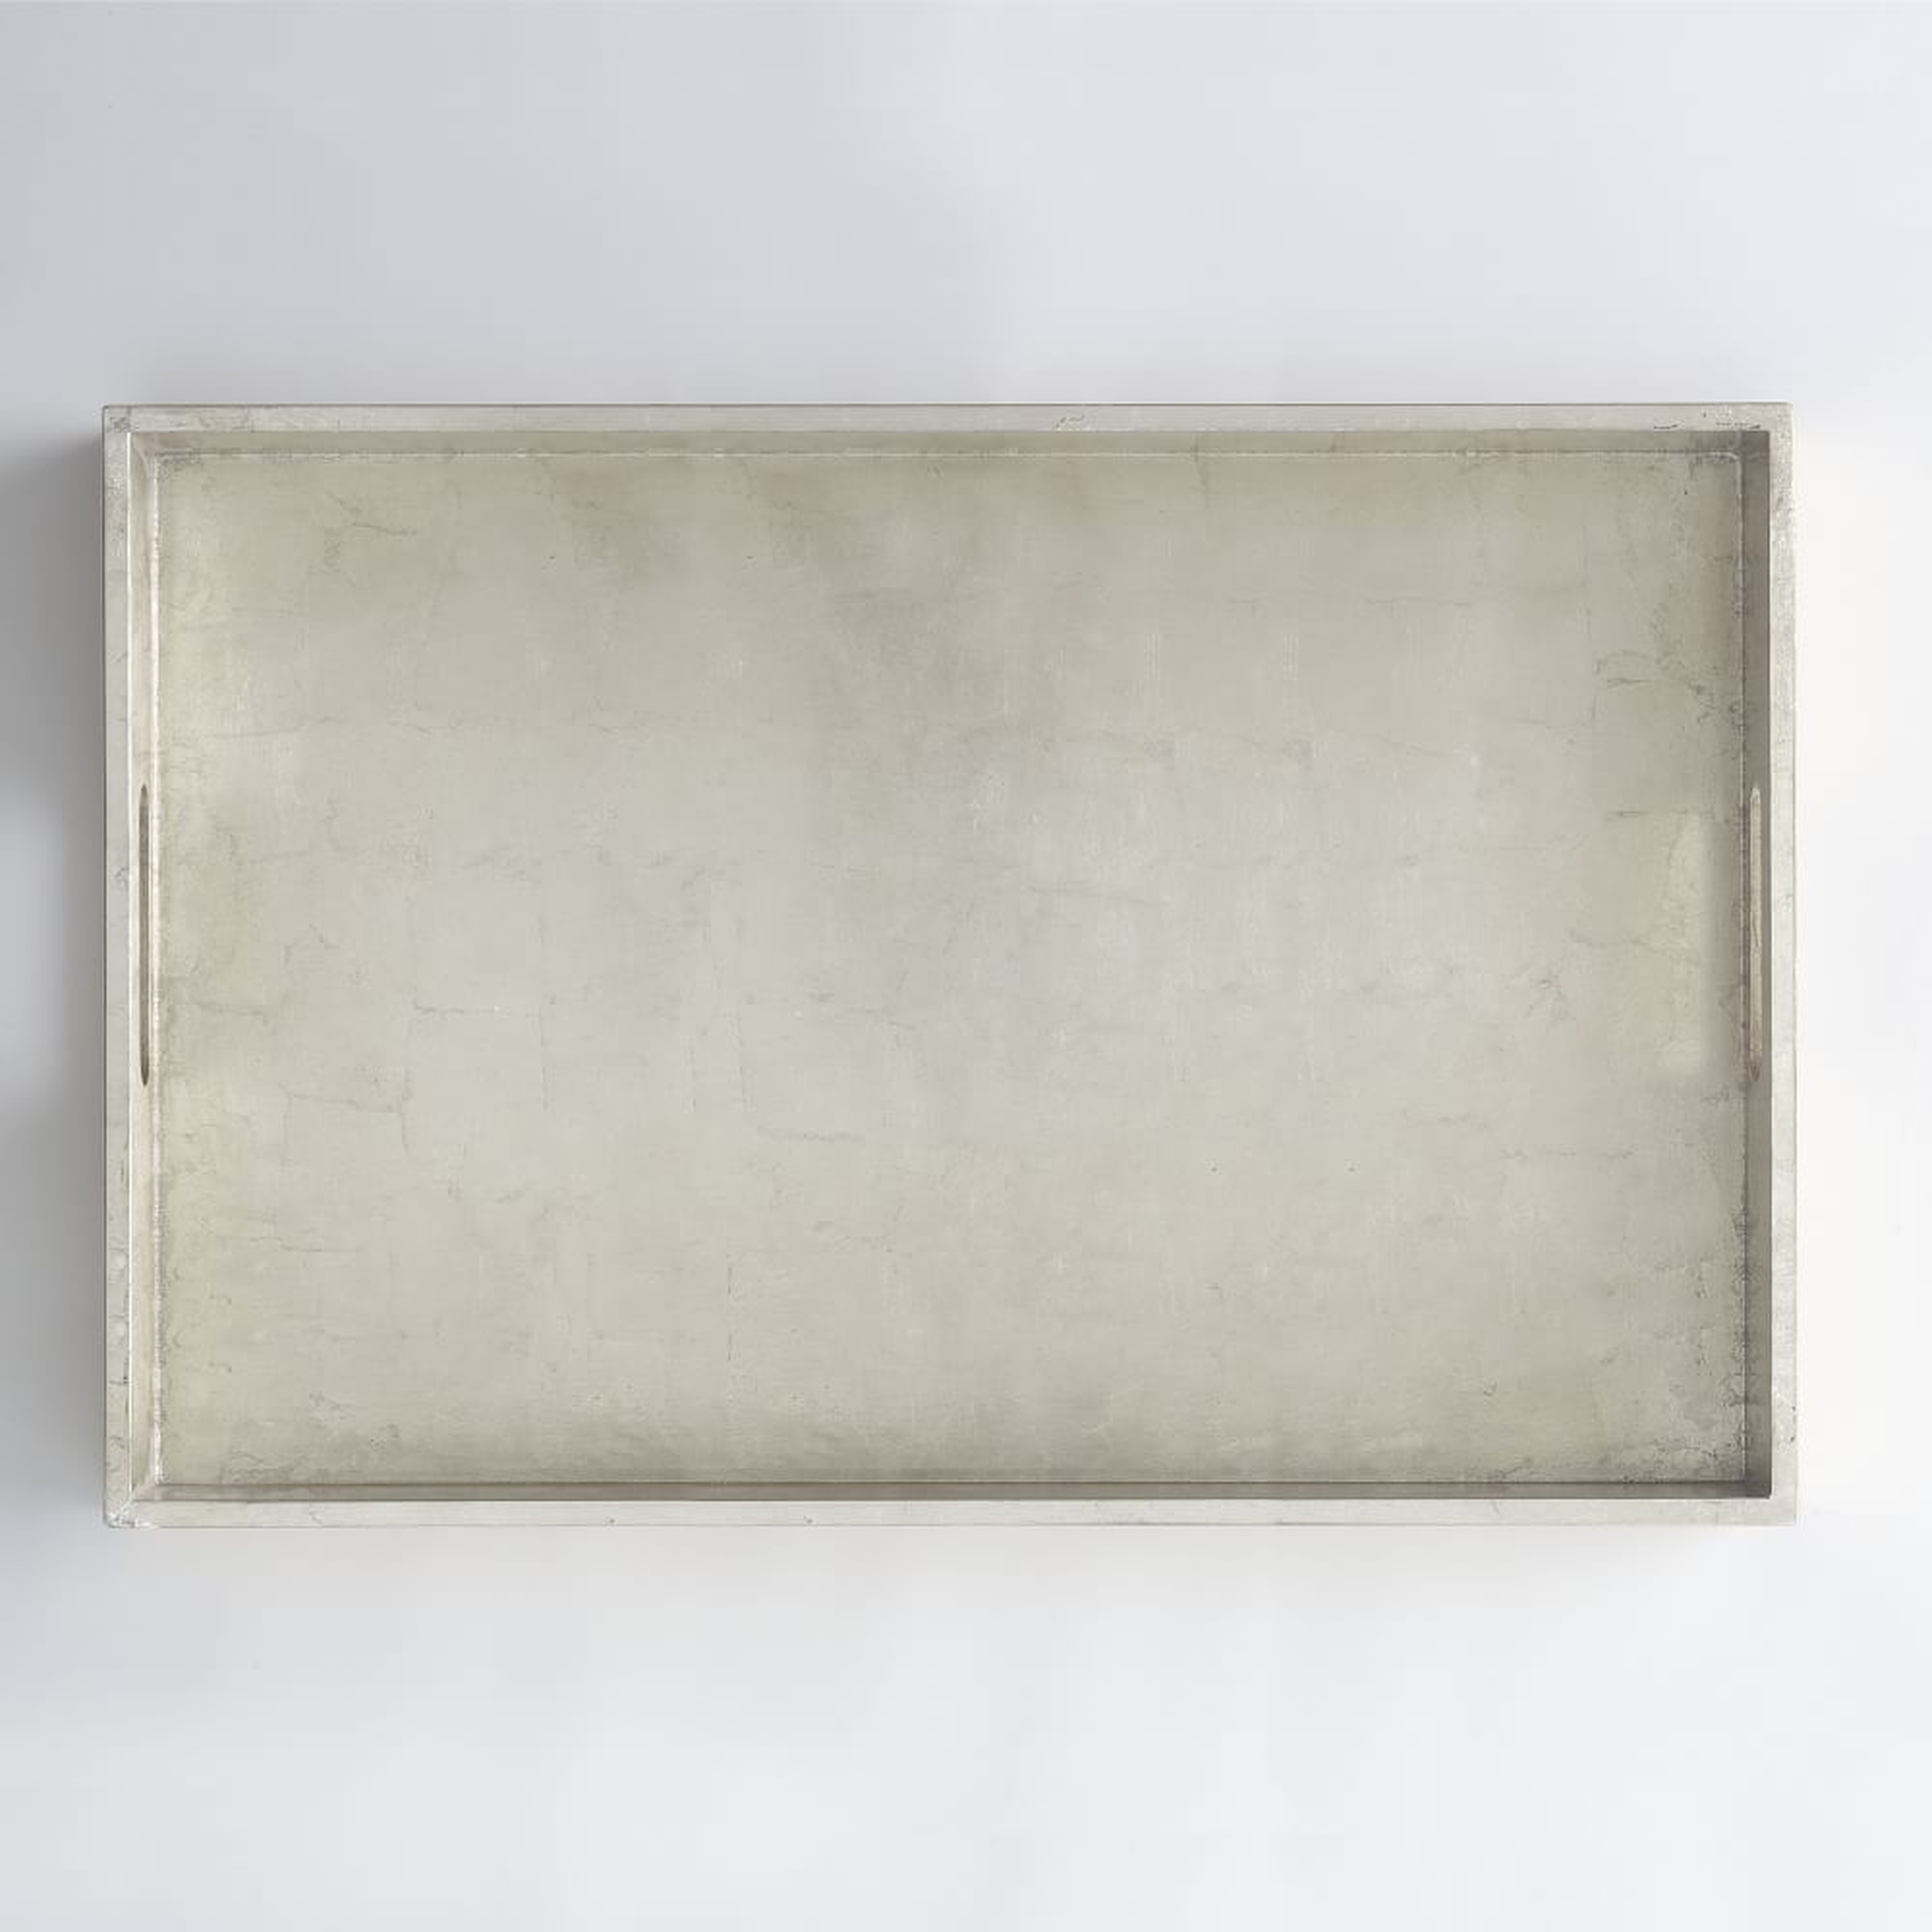 Lacquer Wood Tray 18"x28", Silver - West Elm